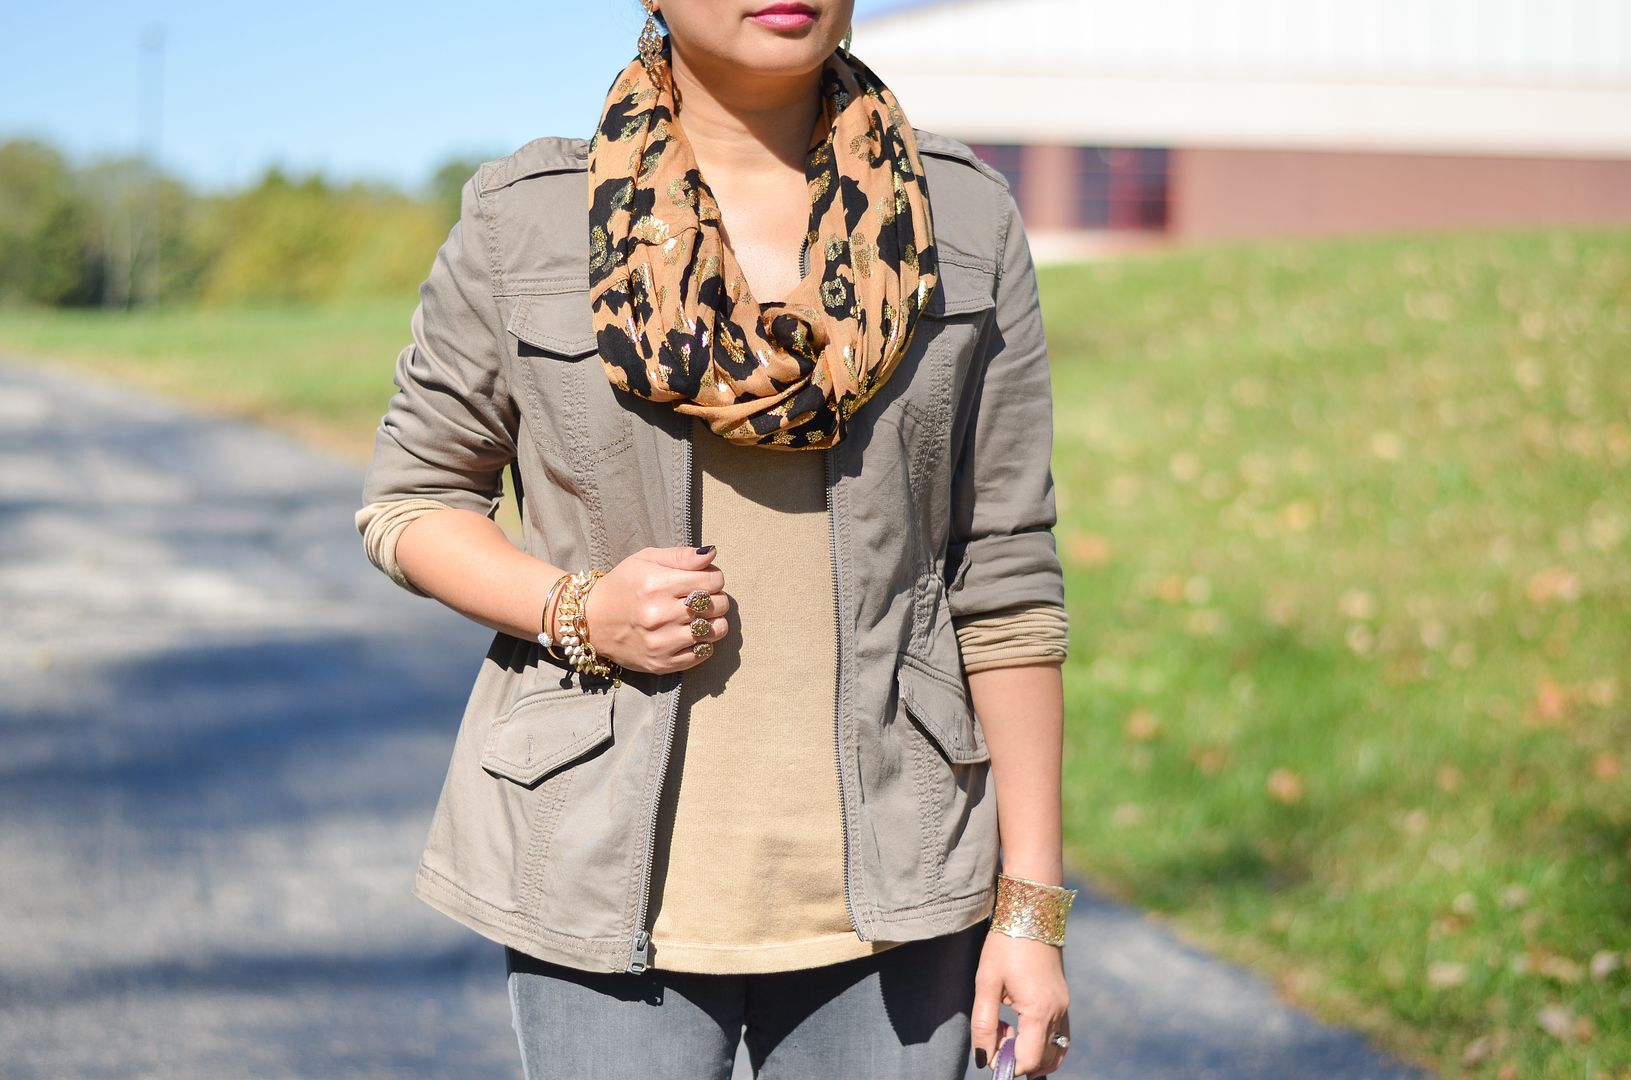 Grey and tan outfit, Leopard scarf